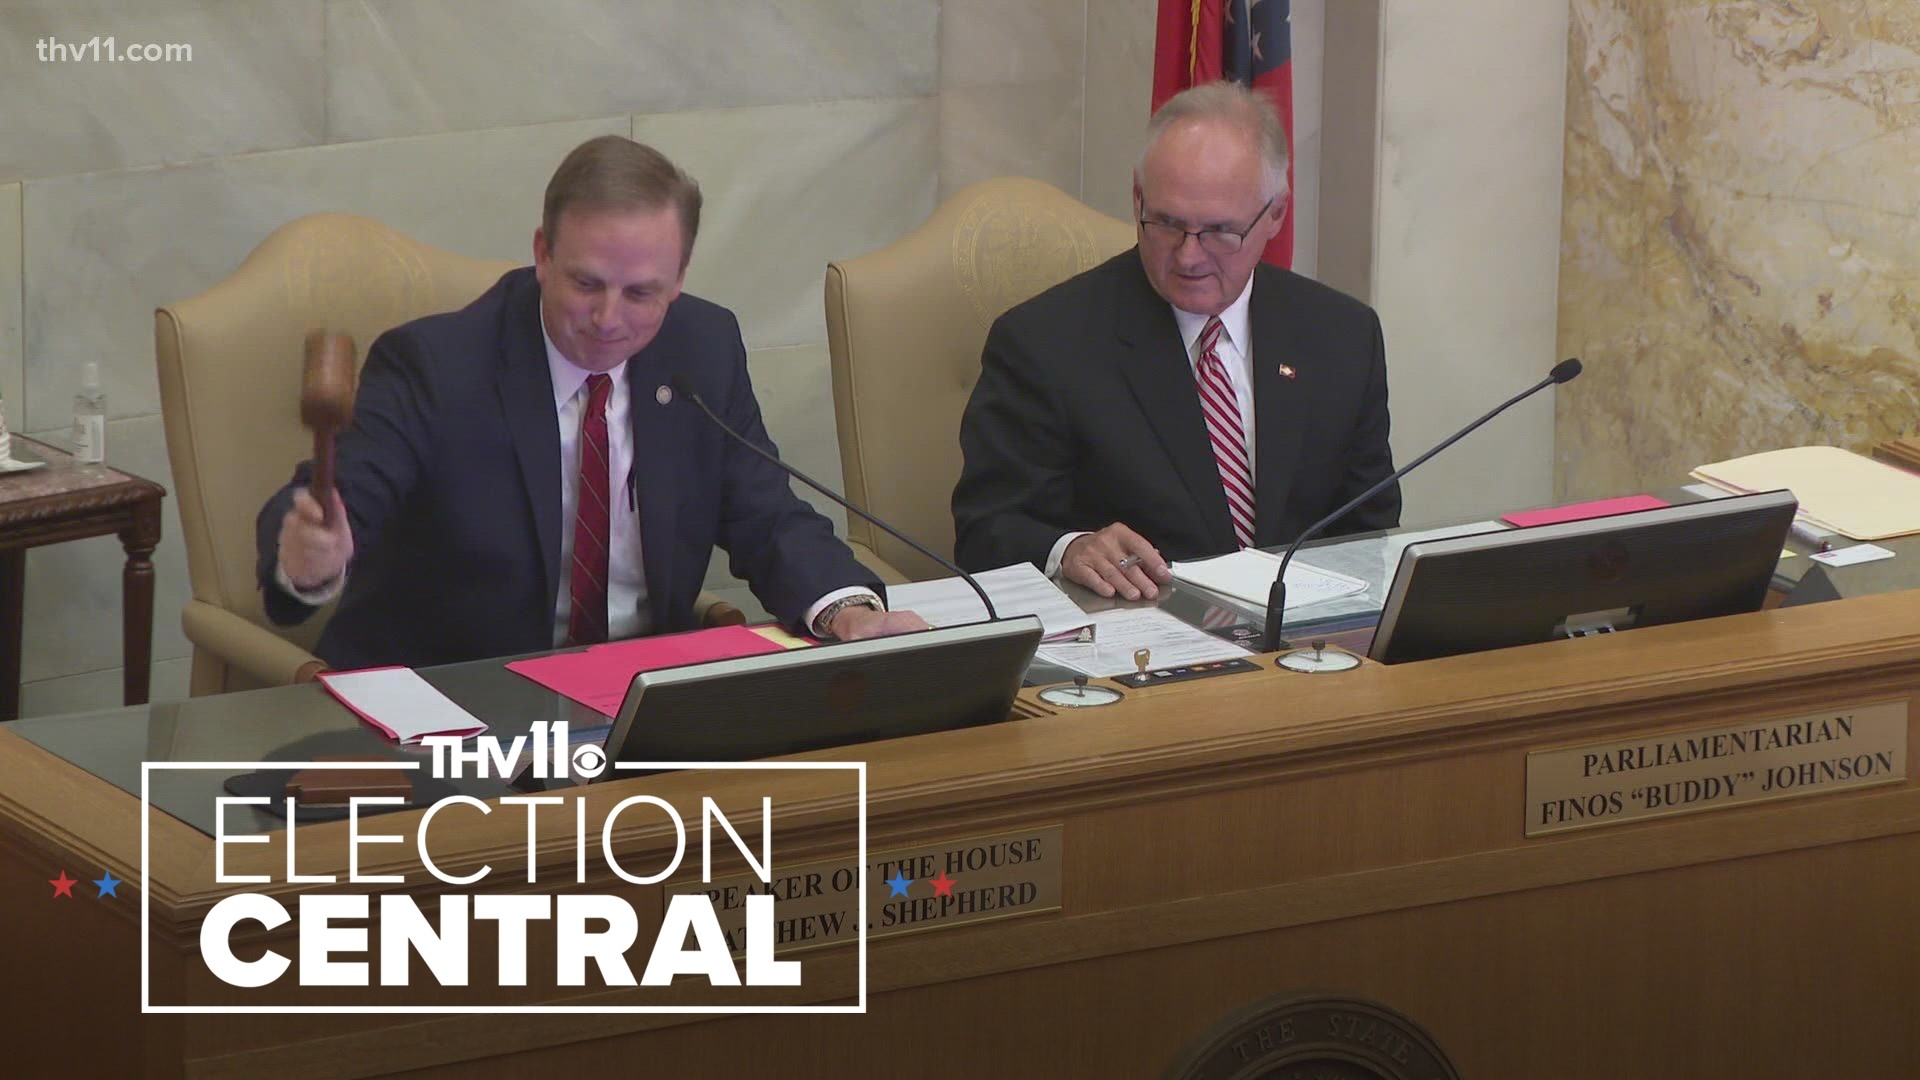 We are about 3 weeks away from the midterm election, and now we're taking a look at Issue 1 and what it would mean for Arkansas if it were to pass.